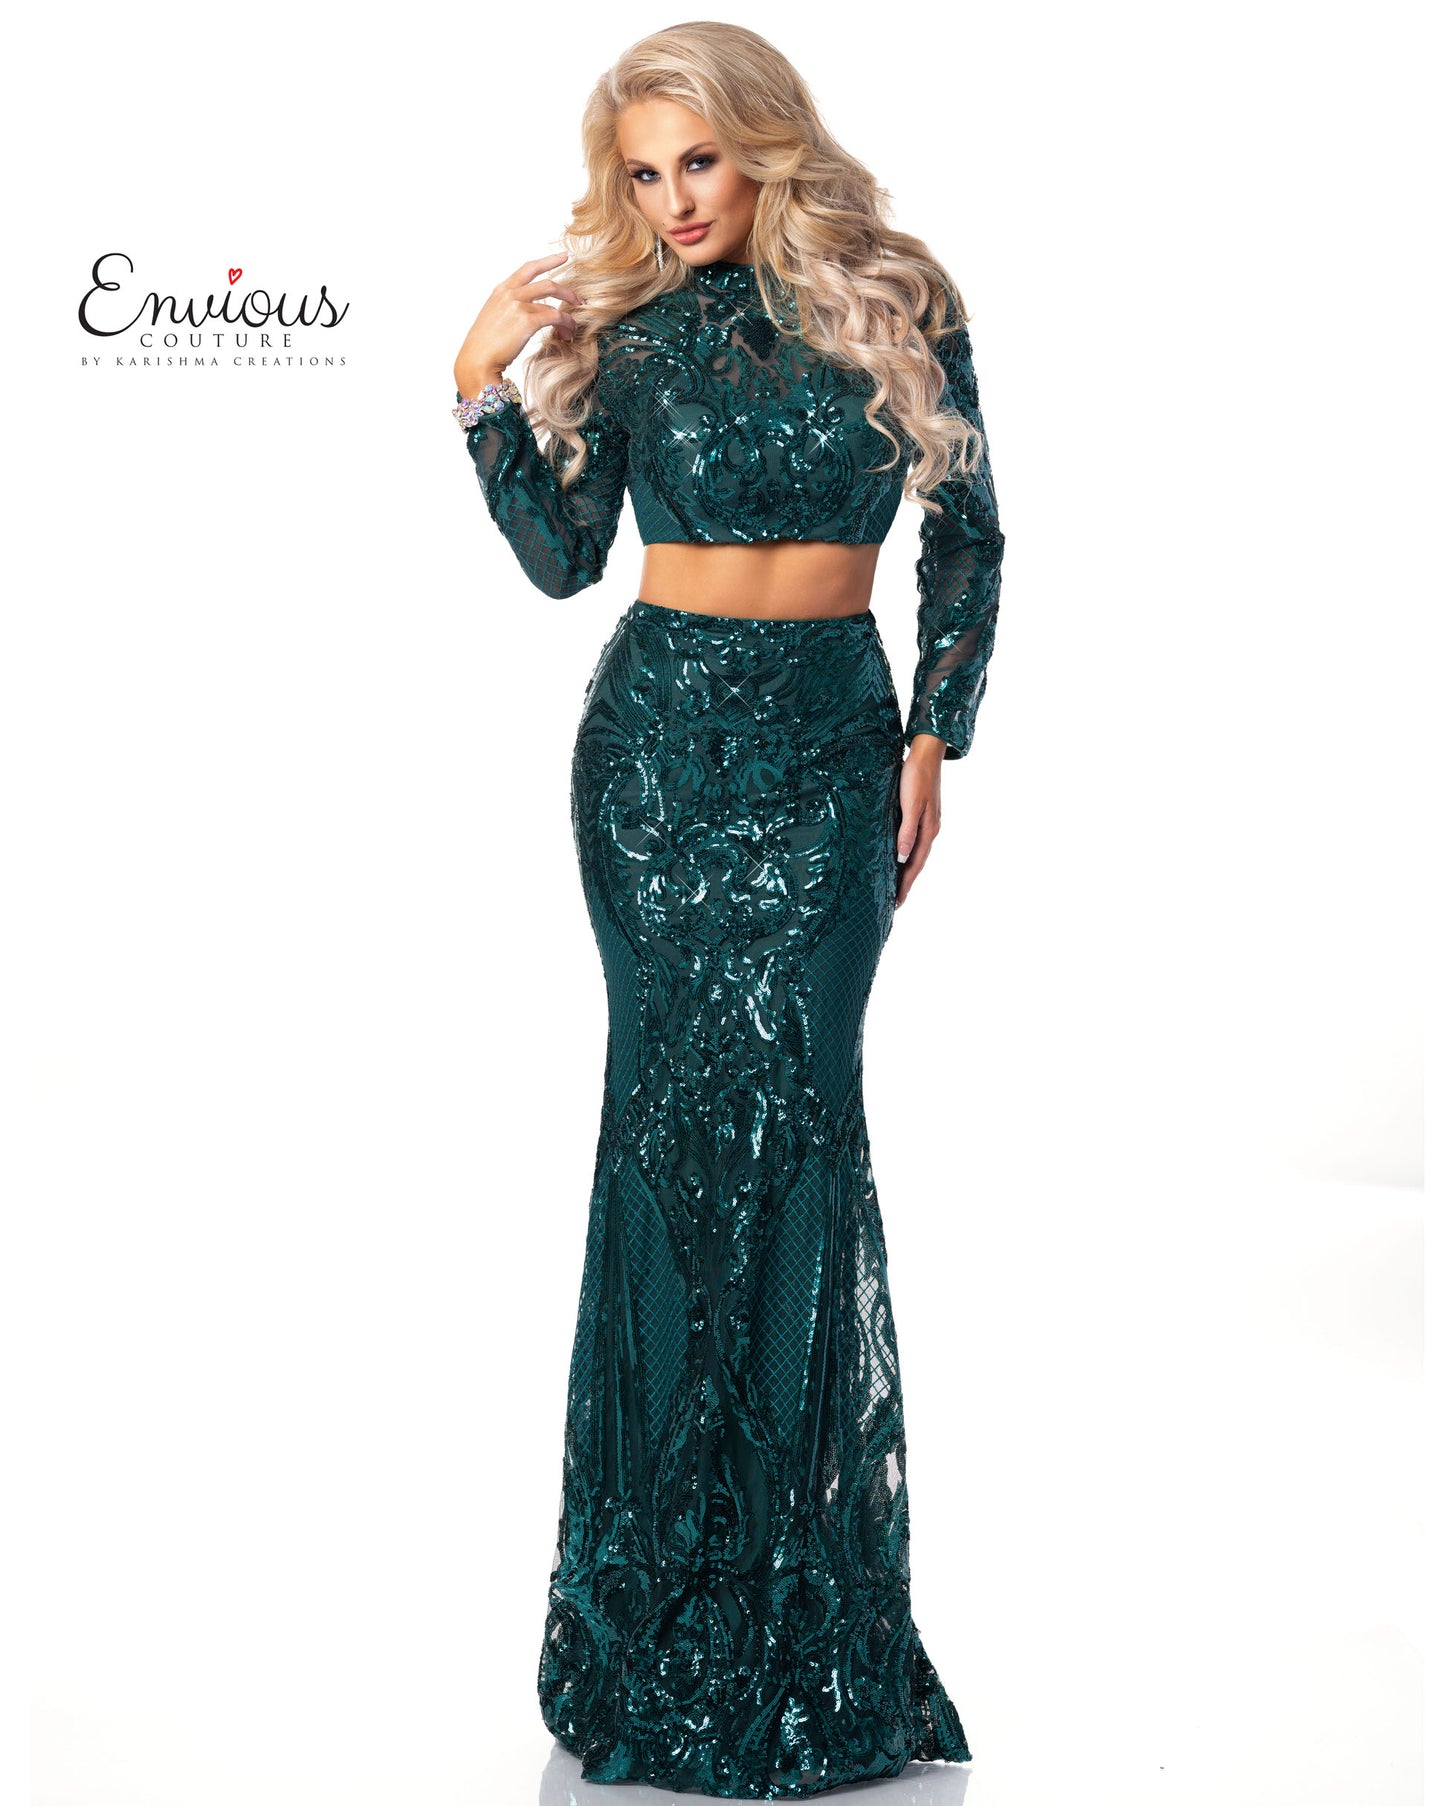 Envious-Couture-E1463-Emerald-Prom-Dress-Front-Two-Peice-Embellished-Sequins-Long-Sleeves